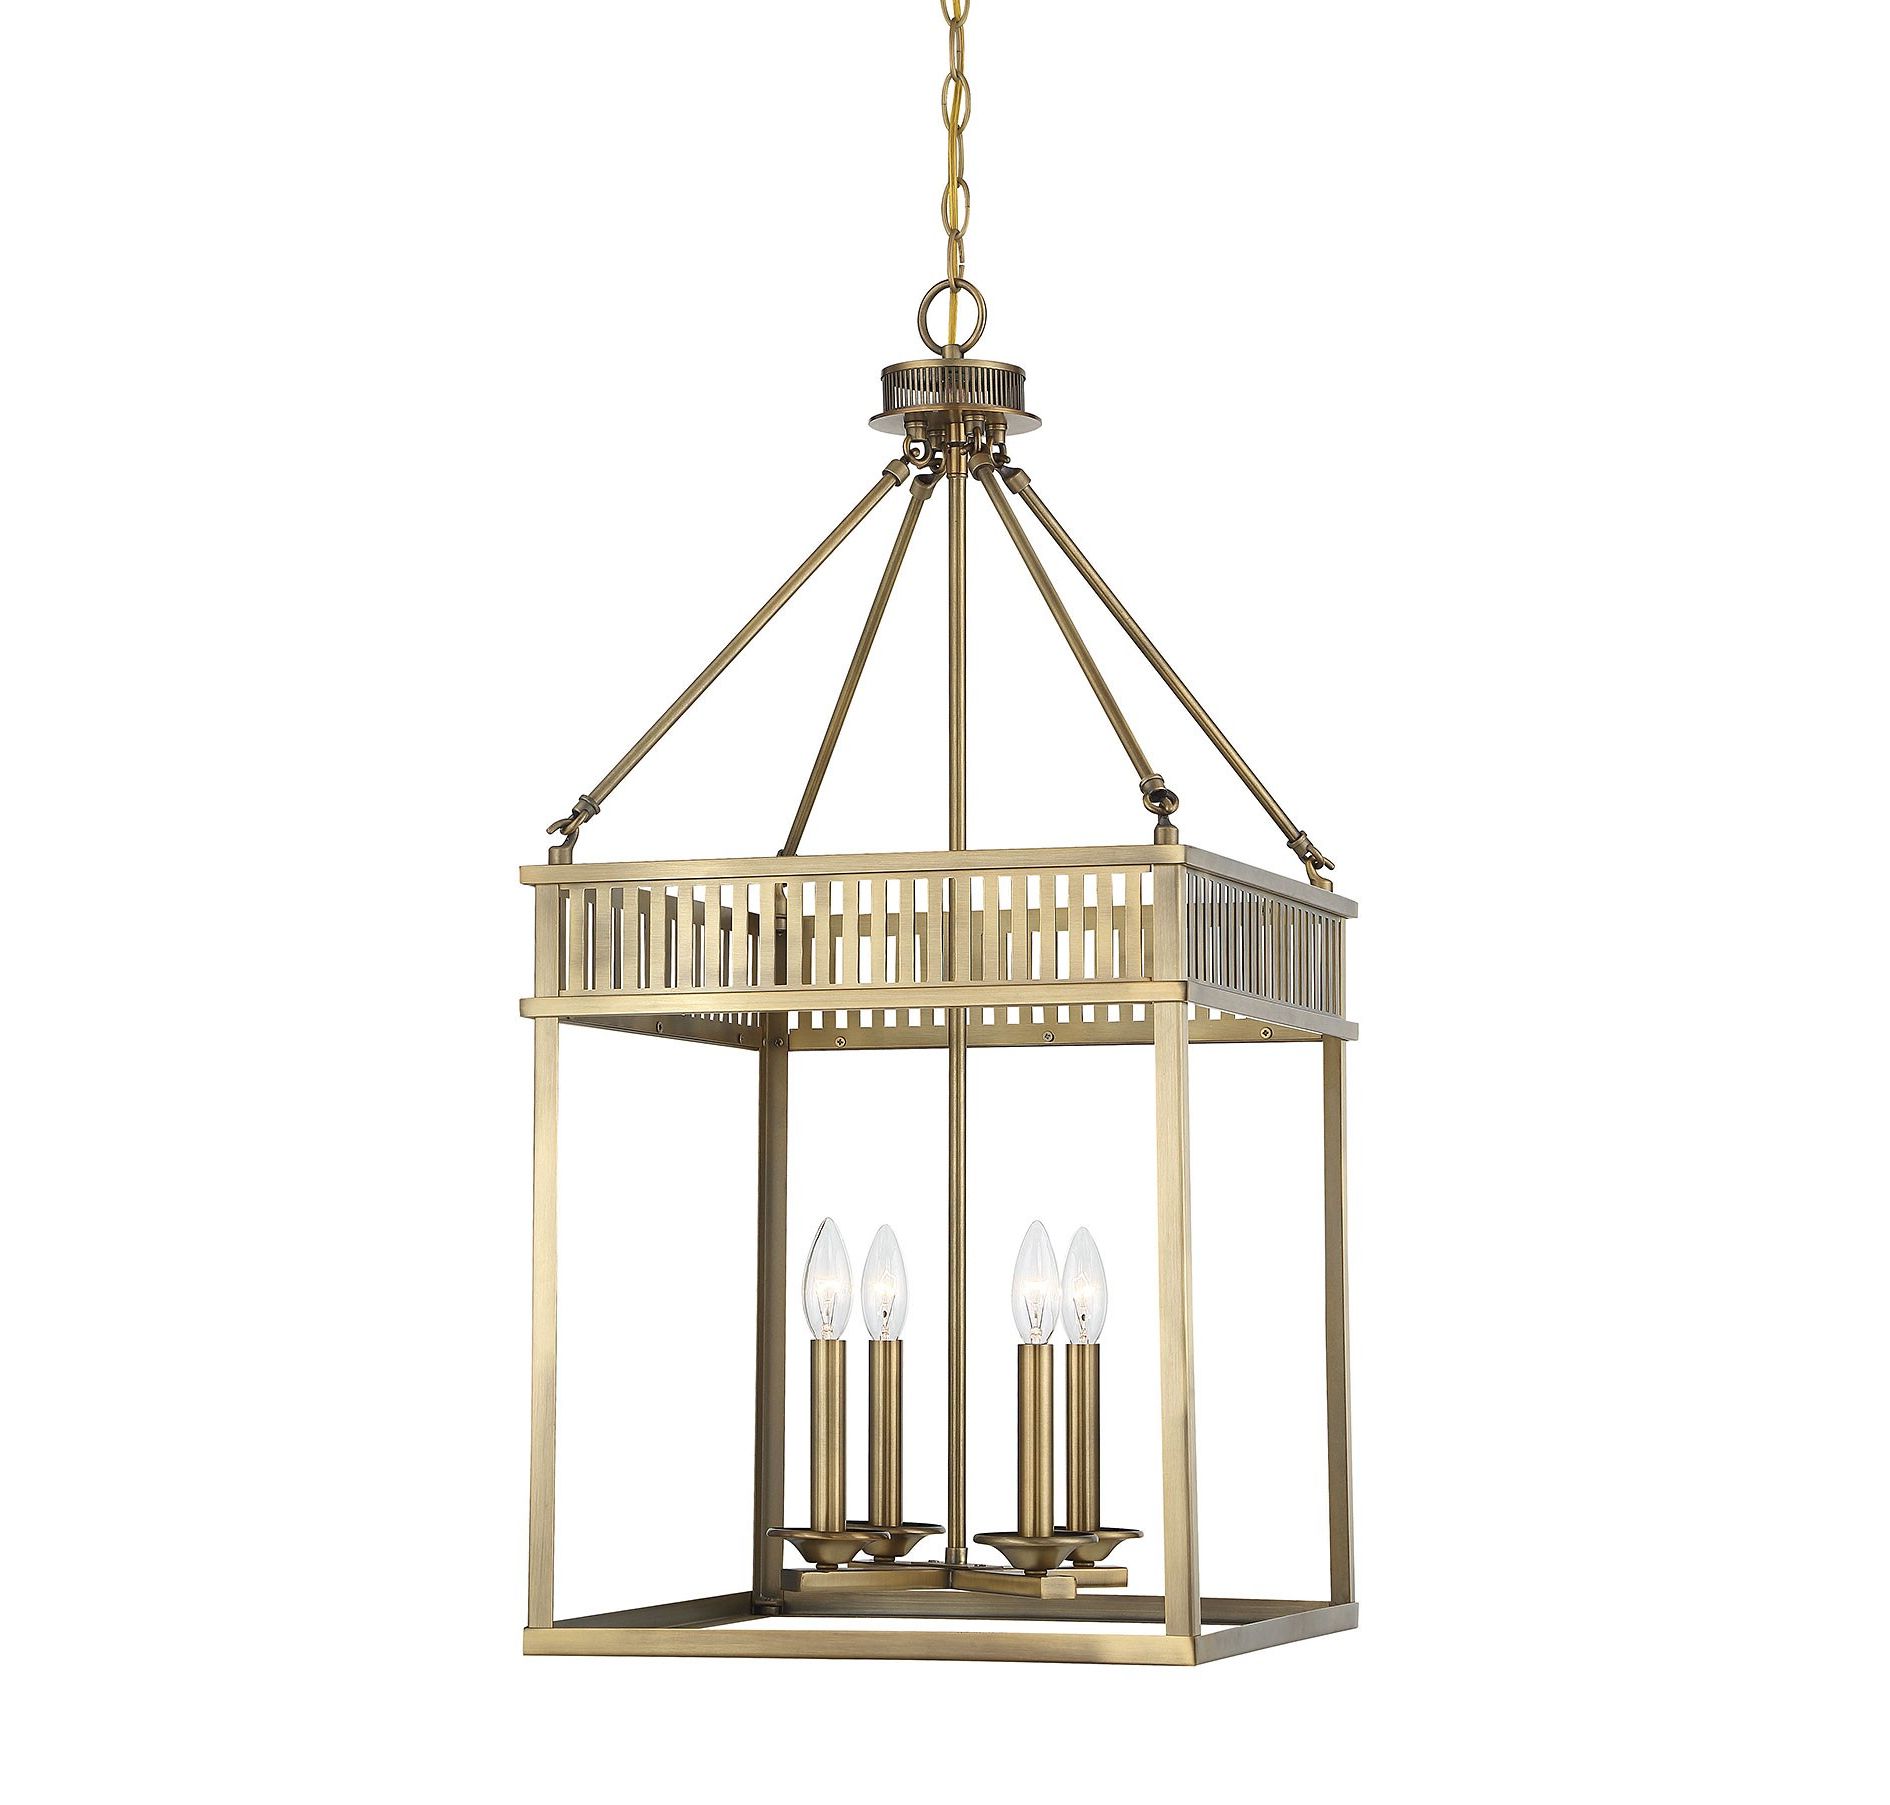 Warm Brass Lantern Chandeliers With Regard To Famous 4 Light Warm Brass Transitional Lantern Pendant Light In The Pendant  Lighting Department At Lowes (View 10 of 15)